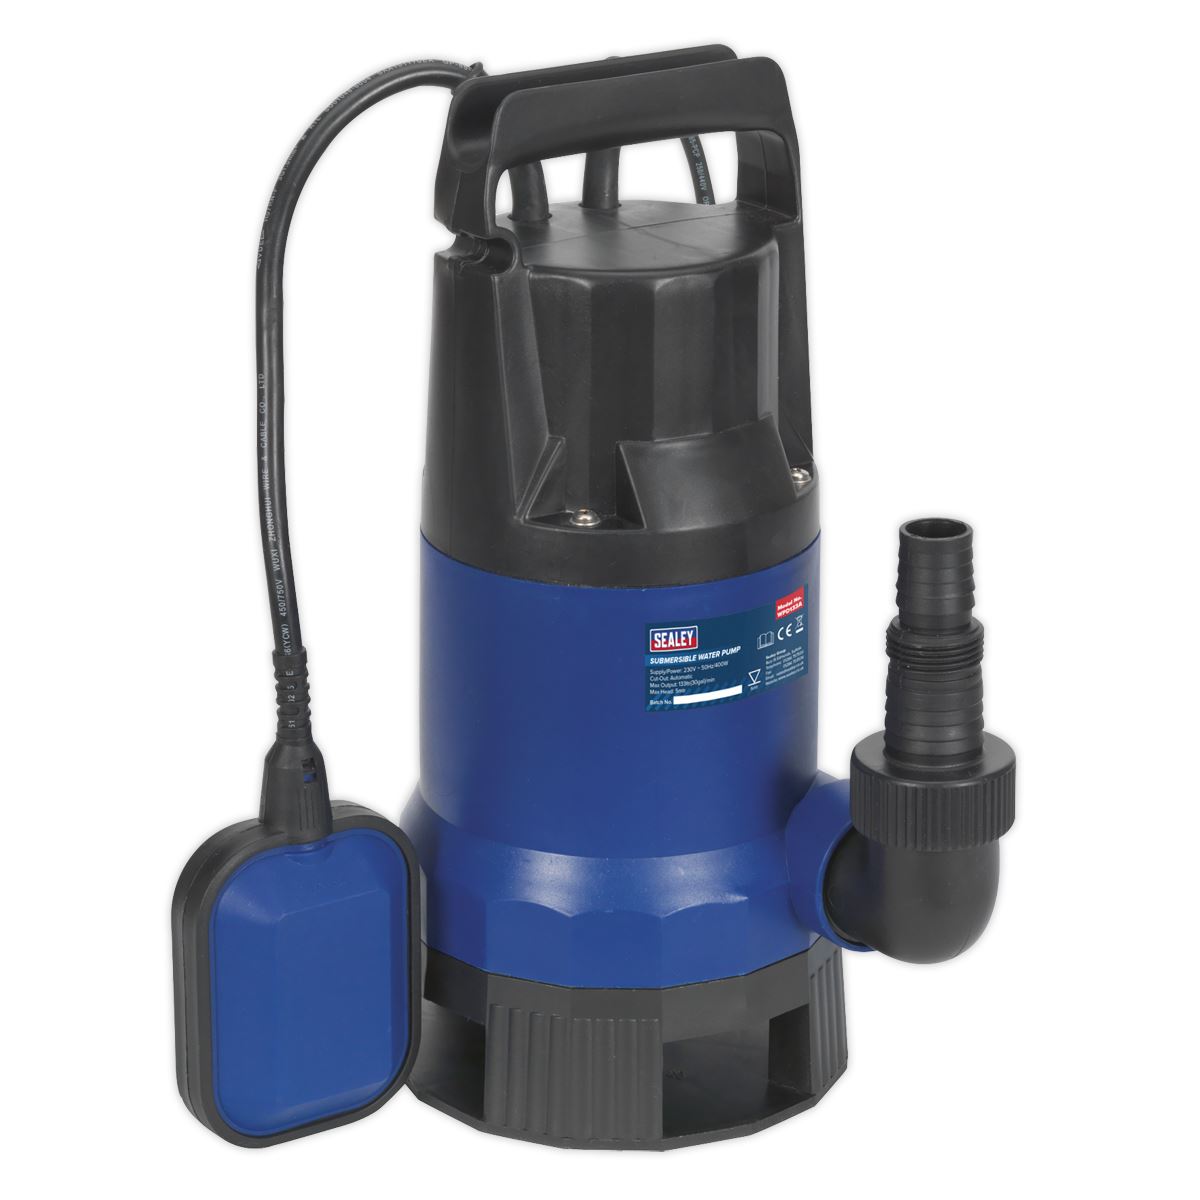 Sealey Submersible Dirty Water Pump Automatic 133L/min 230V